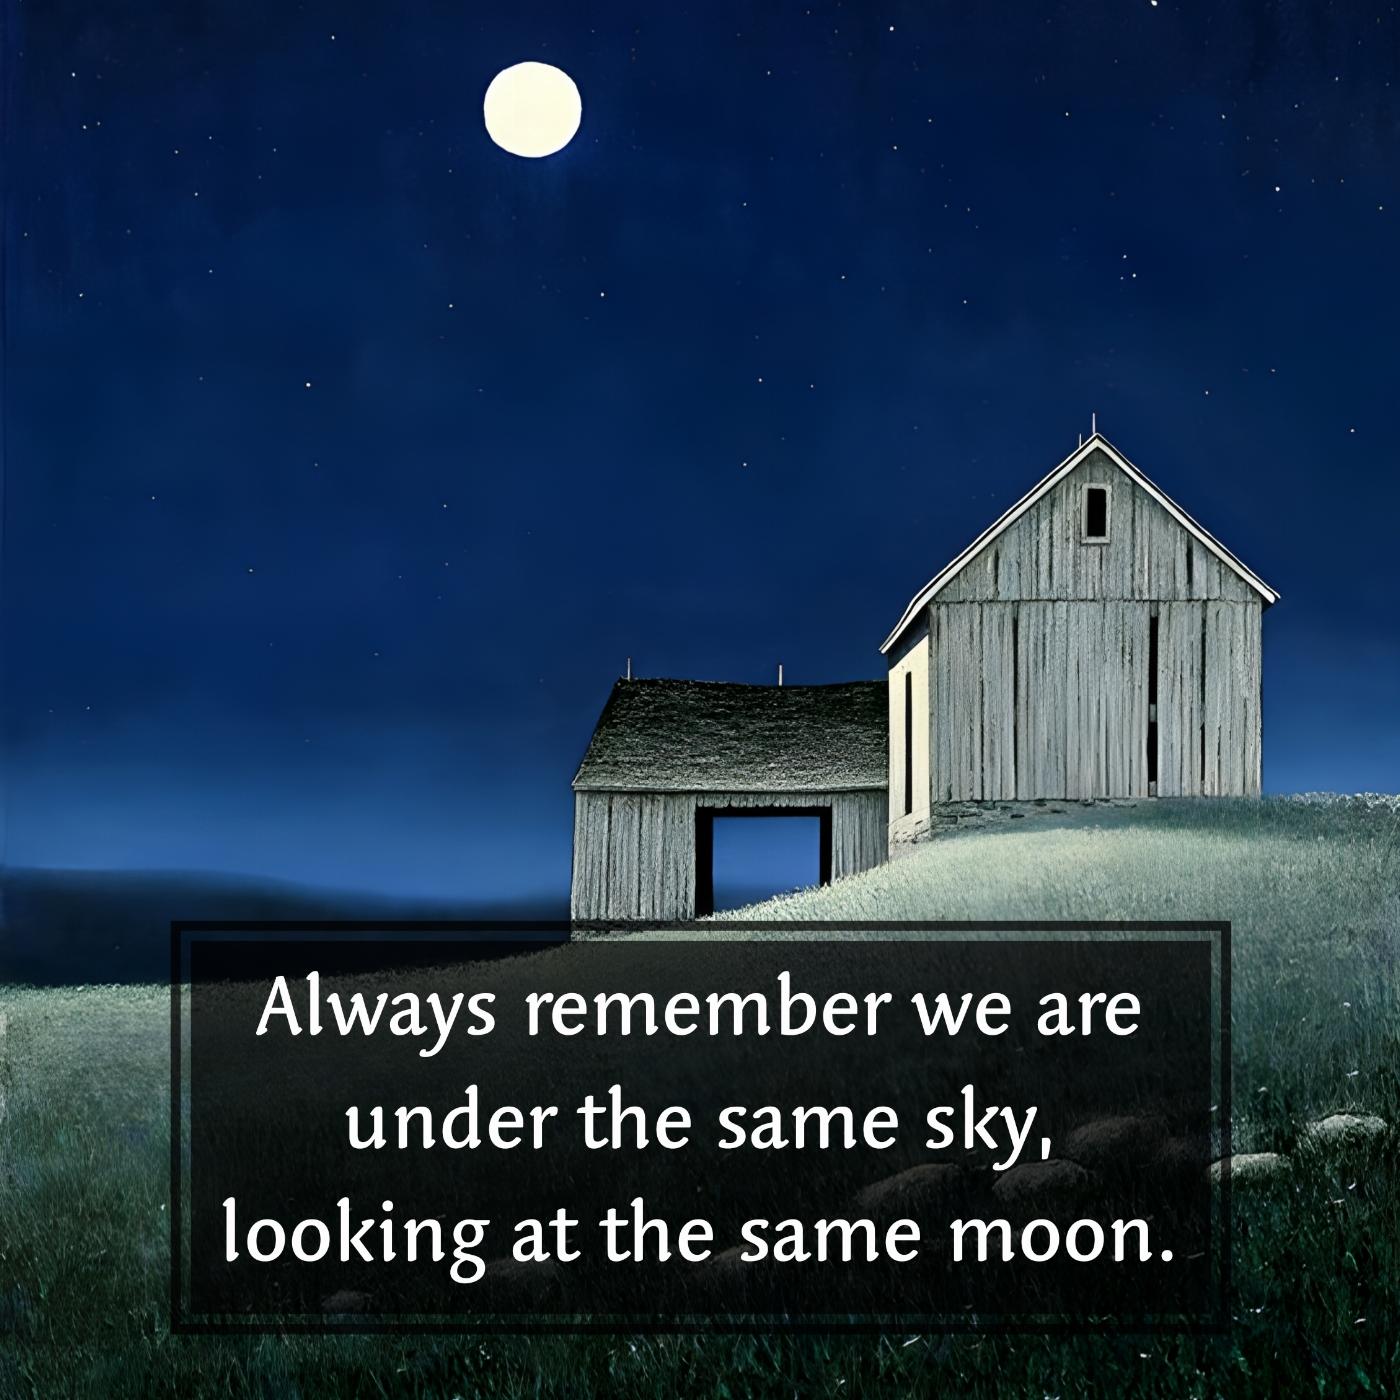 Always remember we are under the same sky